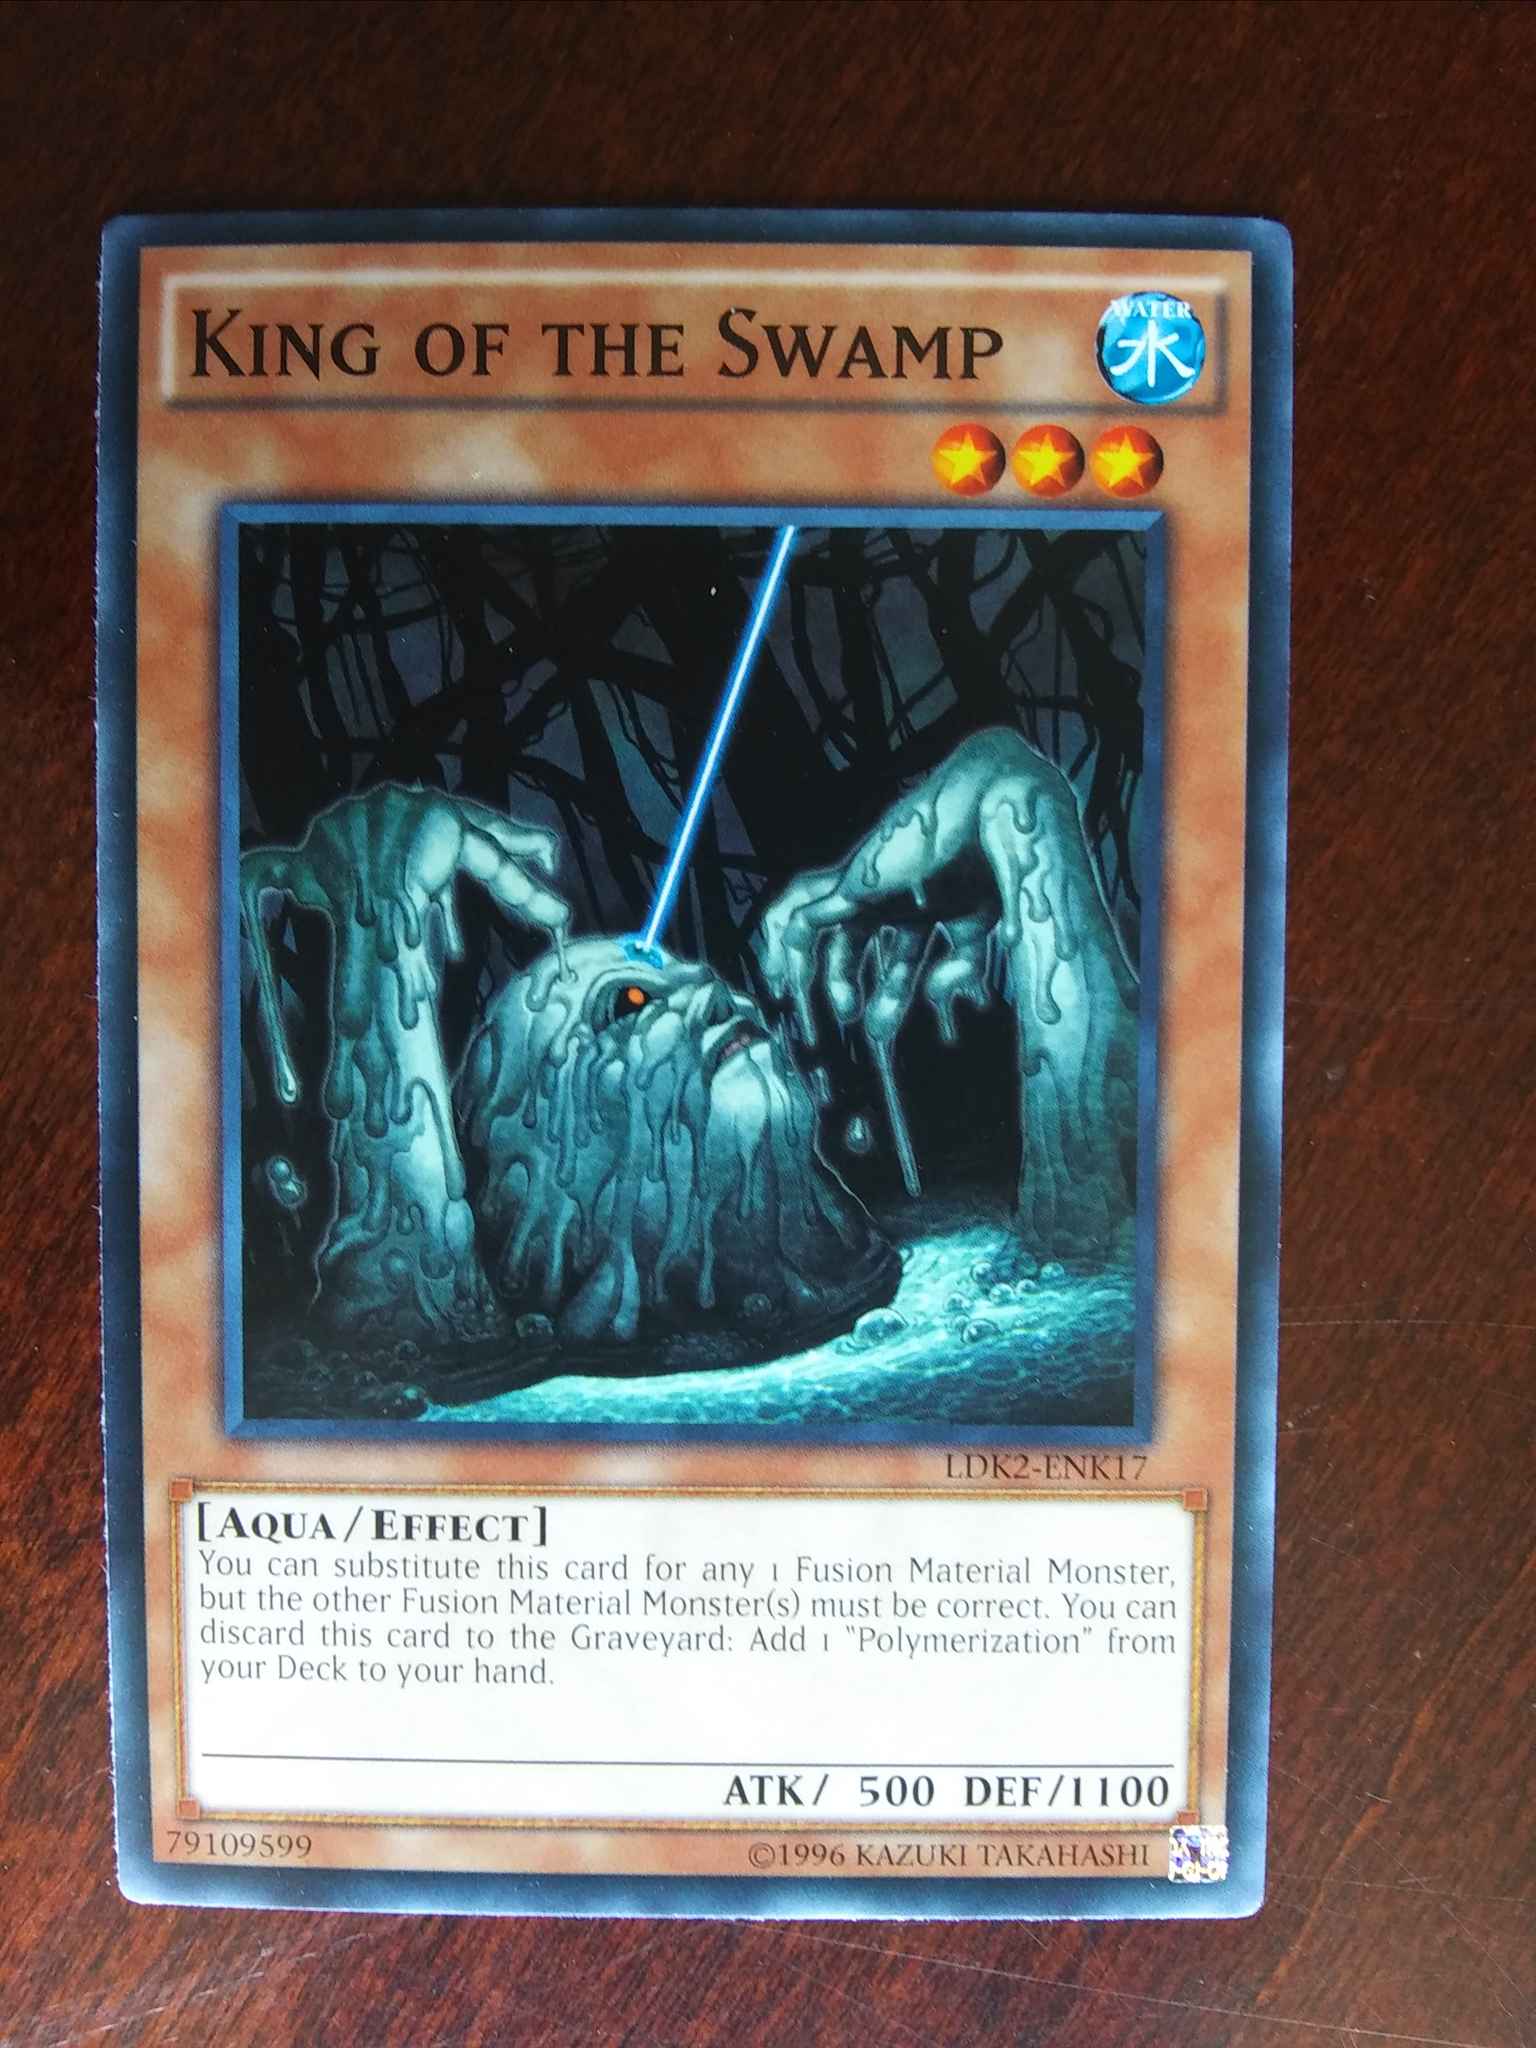 King of the Swamp Common 1st Edition LDK2-ENK17 Yugioh 